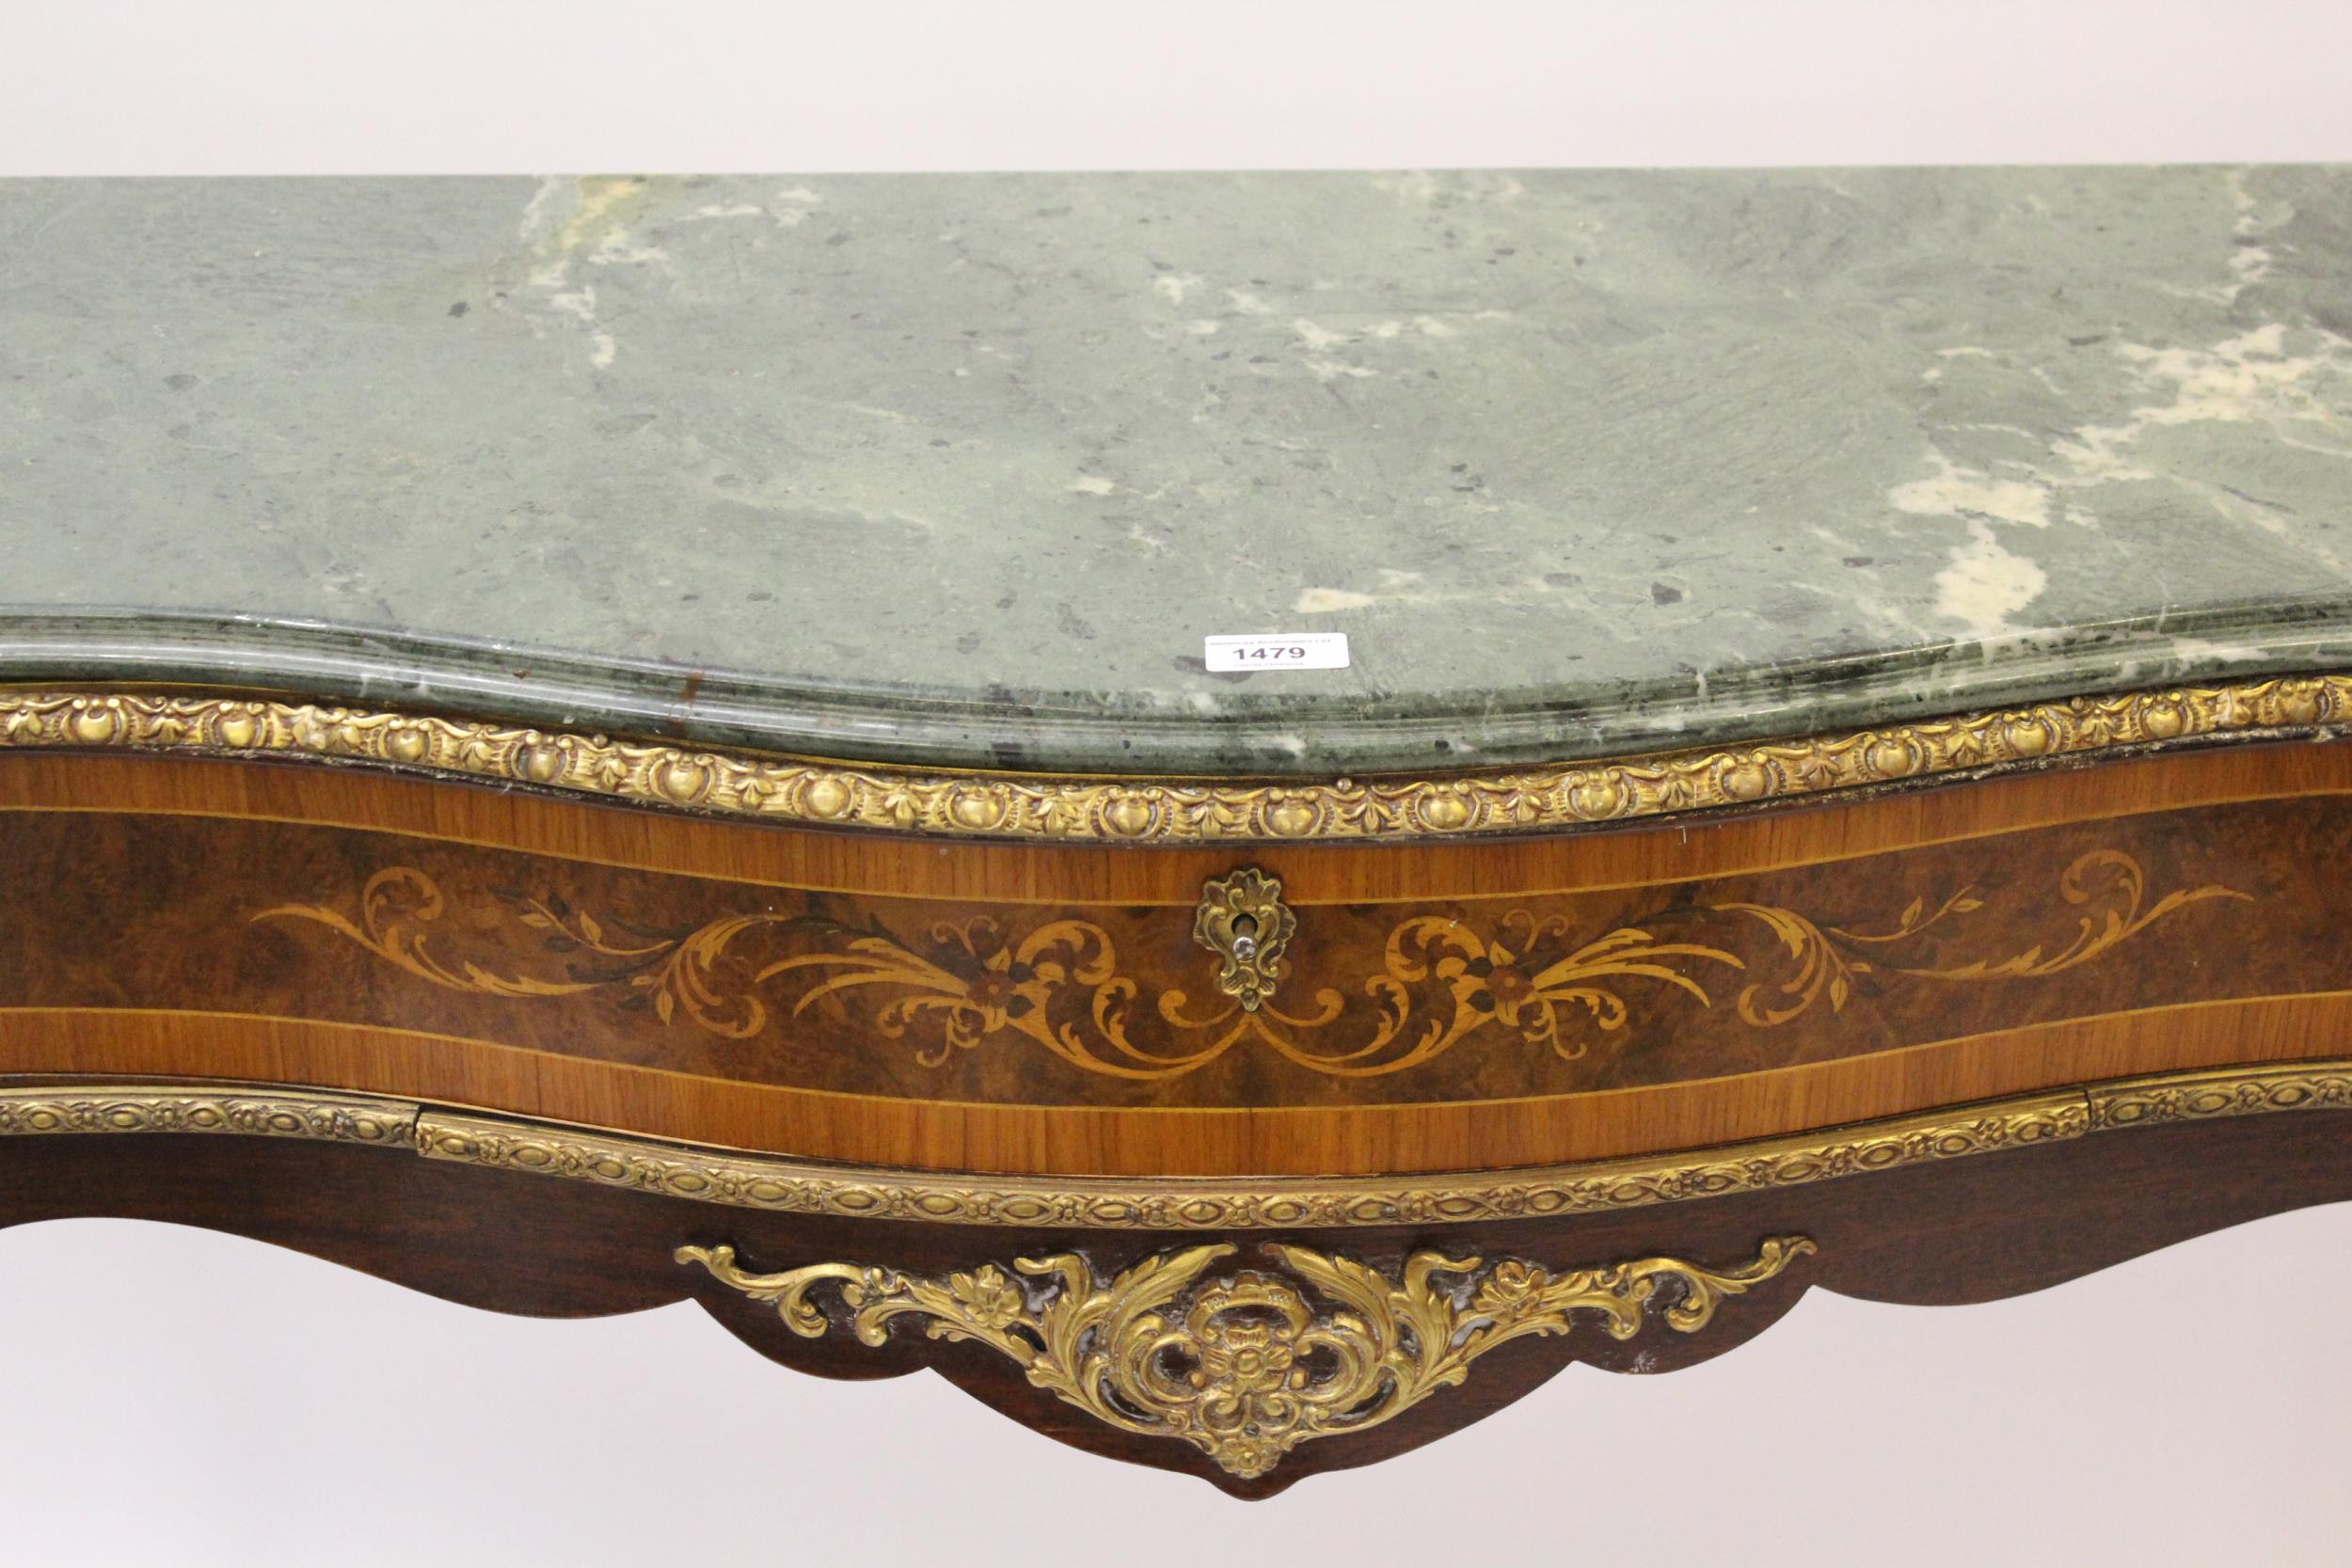 Reproduction French Kingwood marquetry inlaid ormolu mounted console table with a green marble top - Image 2 of 2